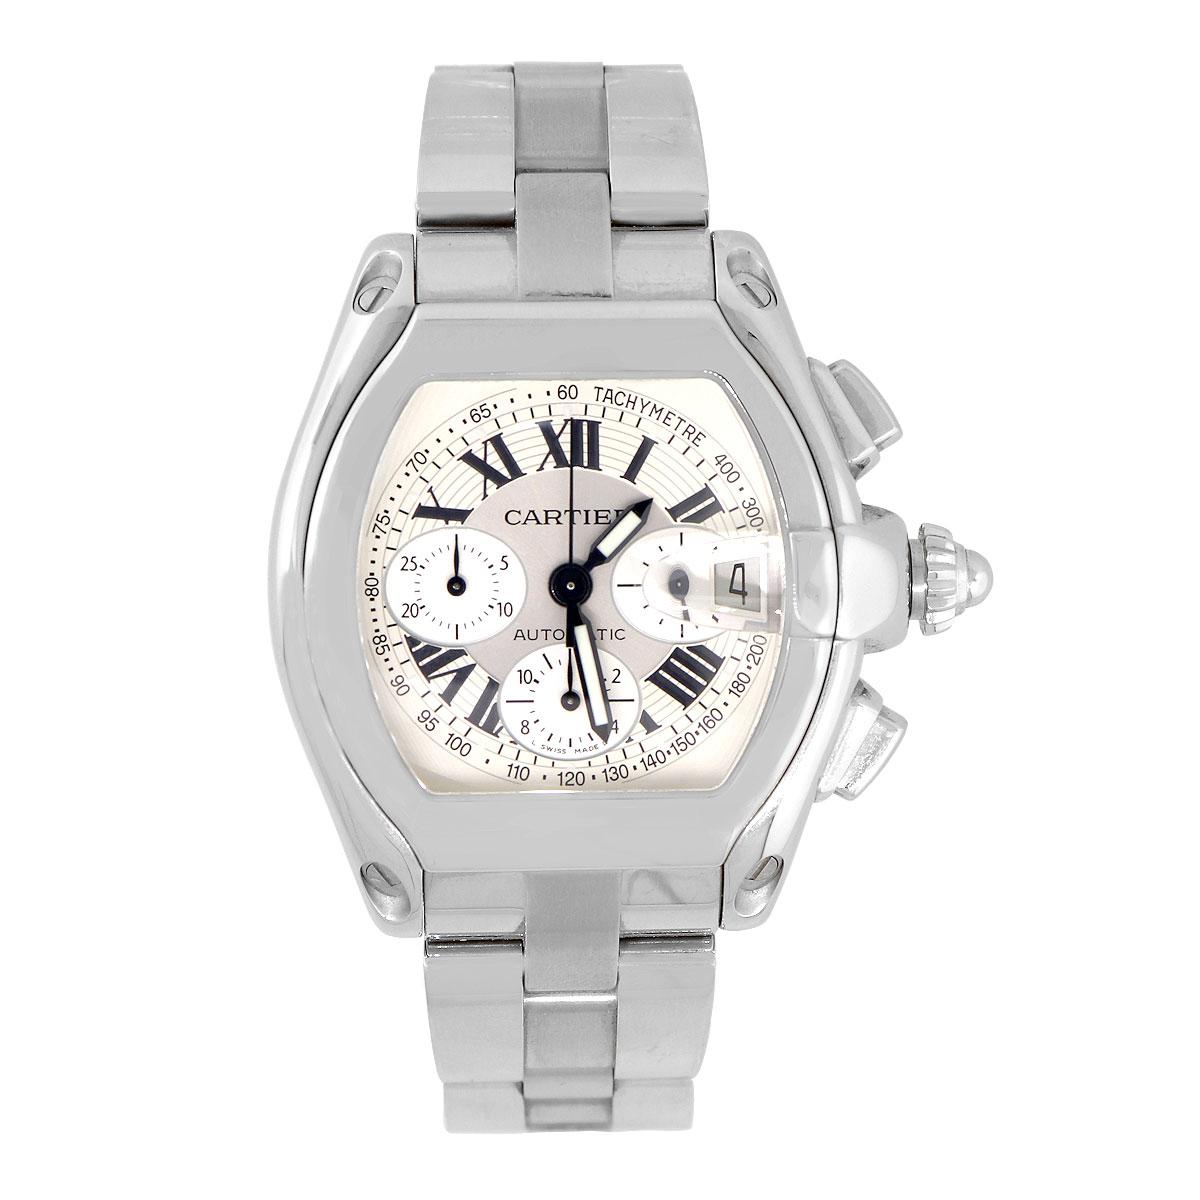 Brand: Cartier
Model: Roadster
Case Material: Stainless Steel
Case Diameter: 49mm x 43mm
Crystal: Sapphire crystal
Bezel: Smooth stainless steel
Dial: Silver chronograph roman dial. Date can be found at 3 o'clock
Bracelet: Stainless steel
Size: Will